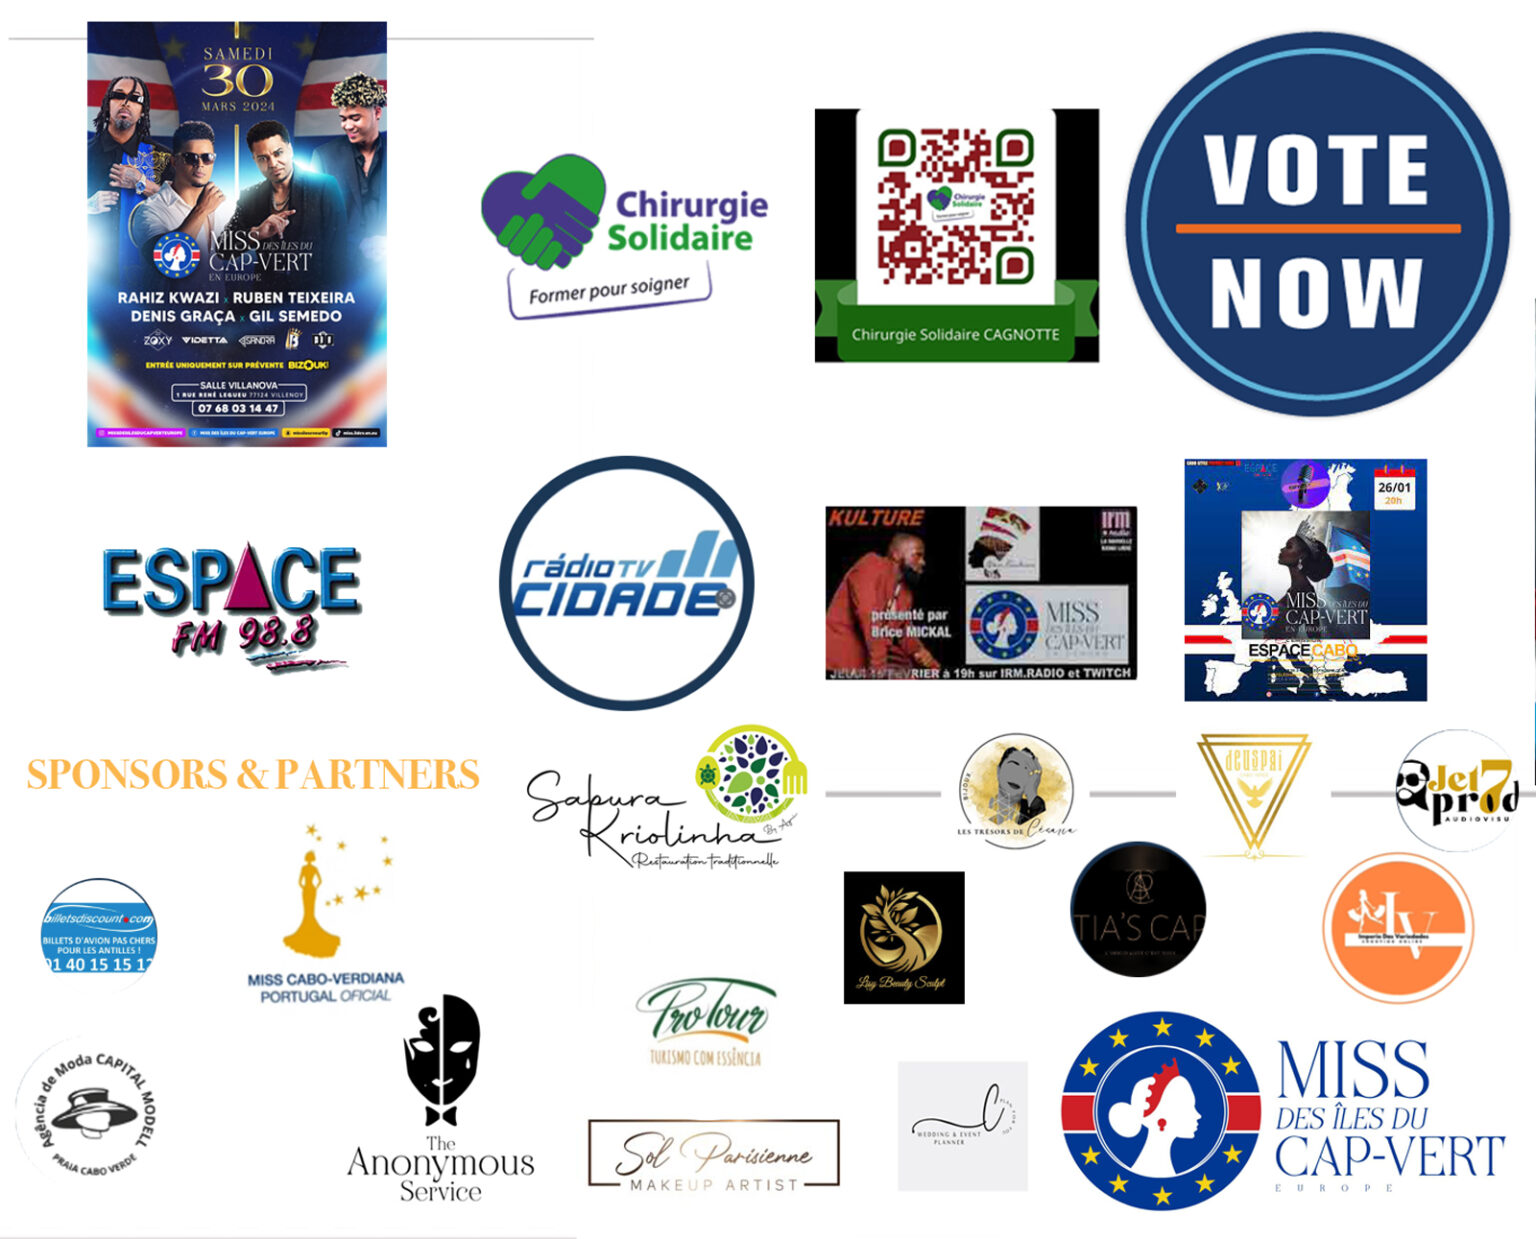 SPONSORS-AFRICA-VOGUE-COVER-Miss-Cap-Vert-des-Iles-Europe-Edition-1-and-the-Esteemed-Sponsors-and-Partnerst-DN-AFRICA-Media-Partner-